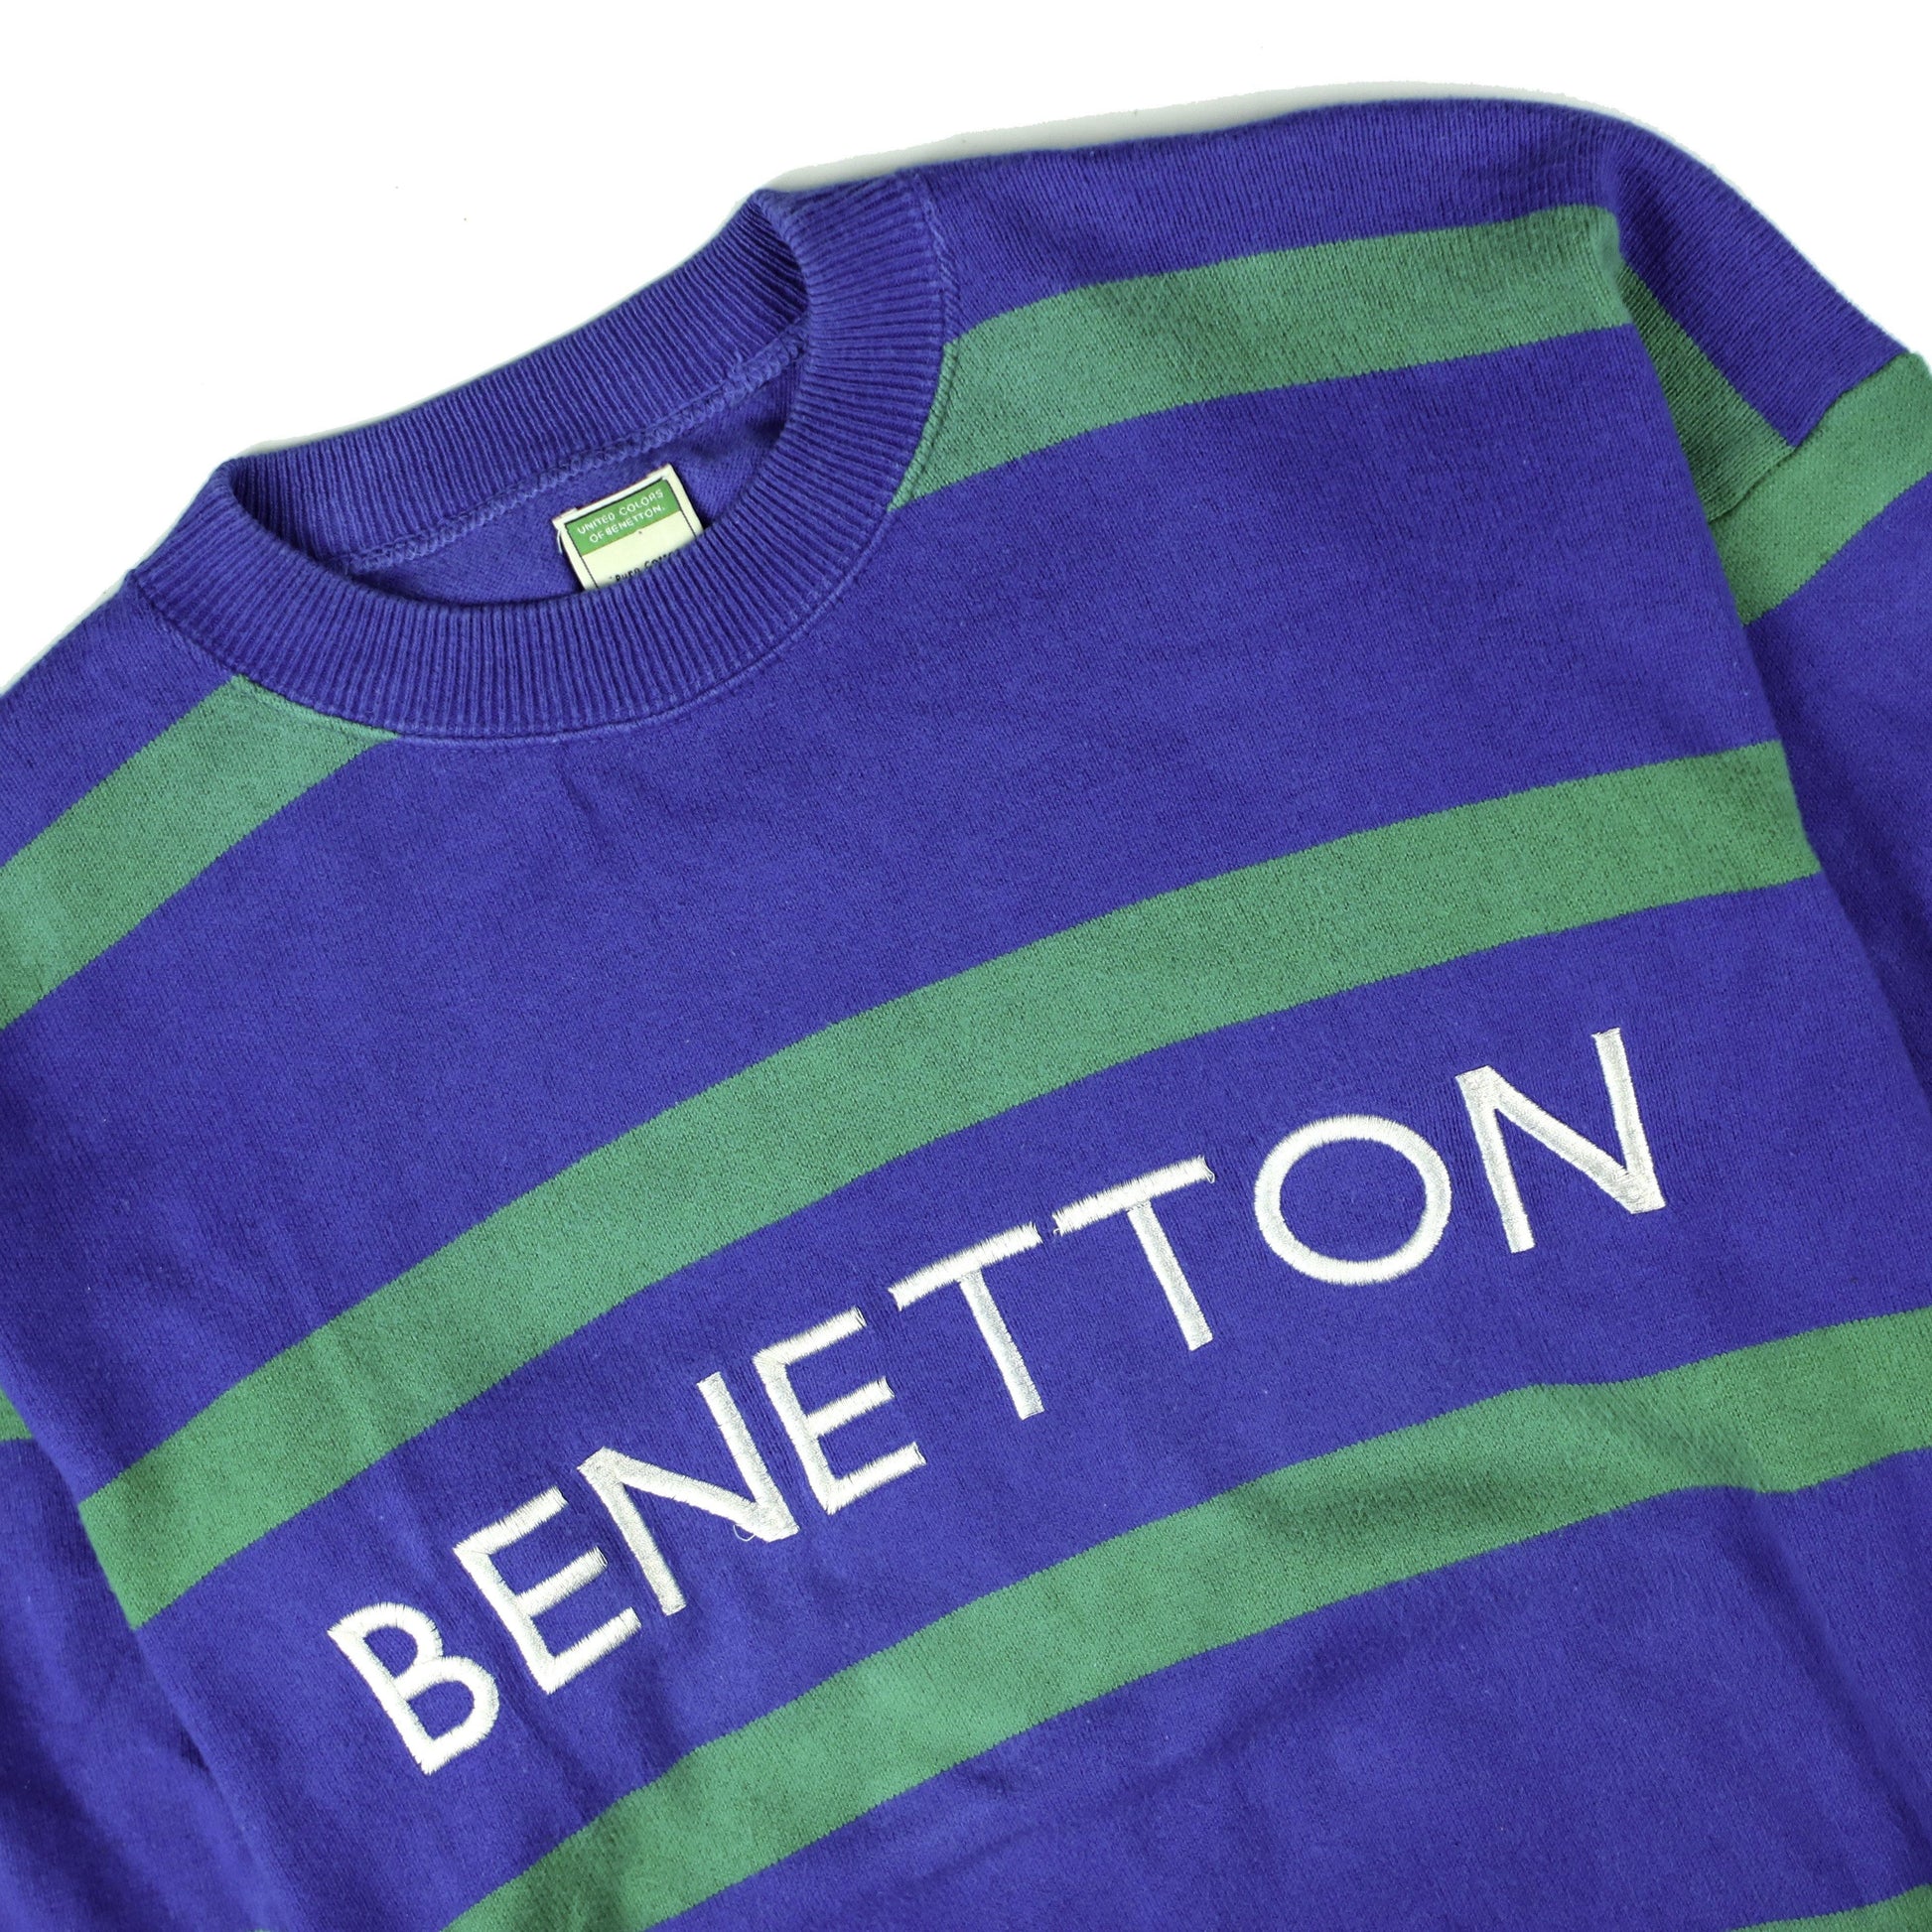 BENETTON 90S STRIPED SWEATER (S) - Known Source